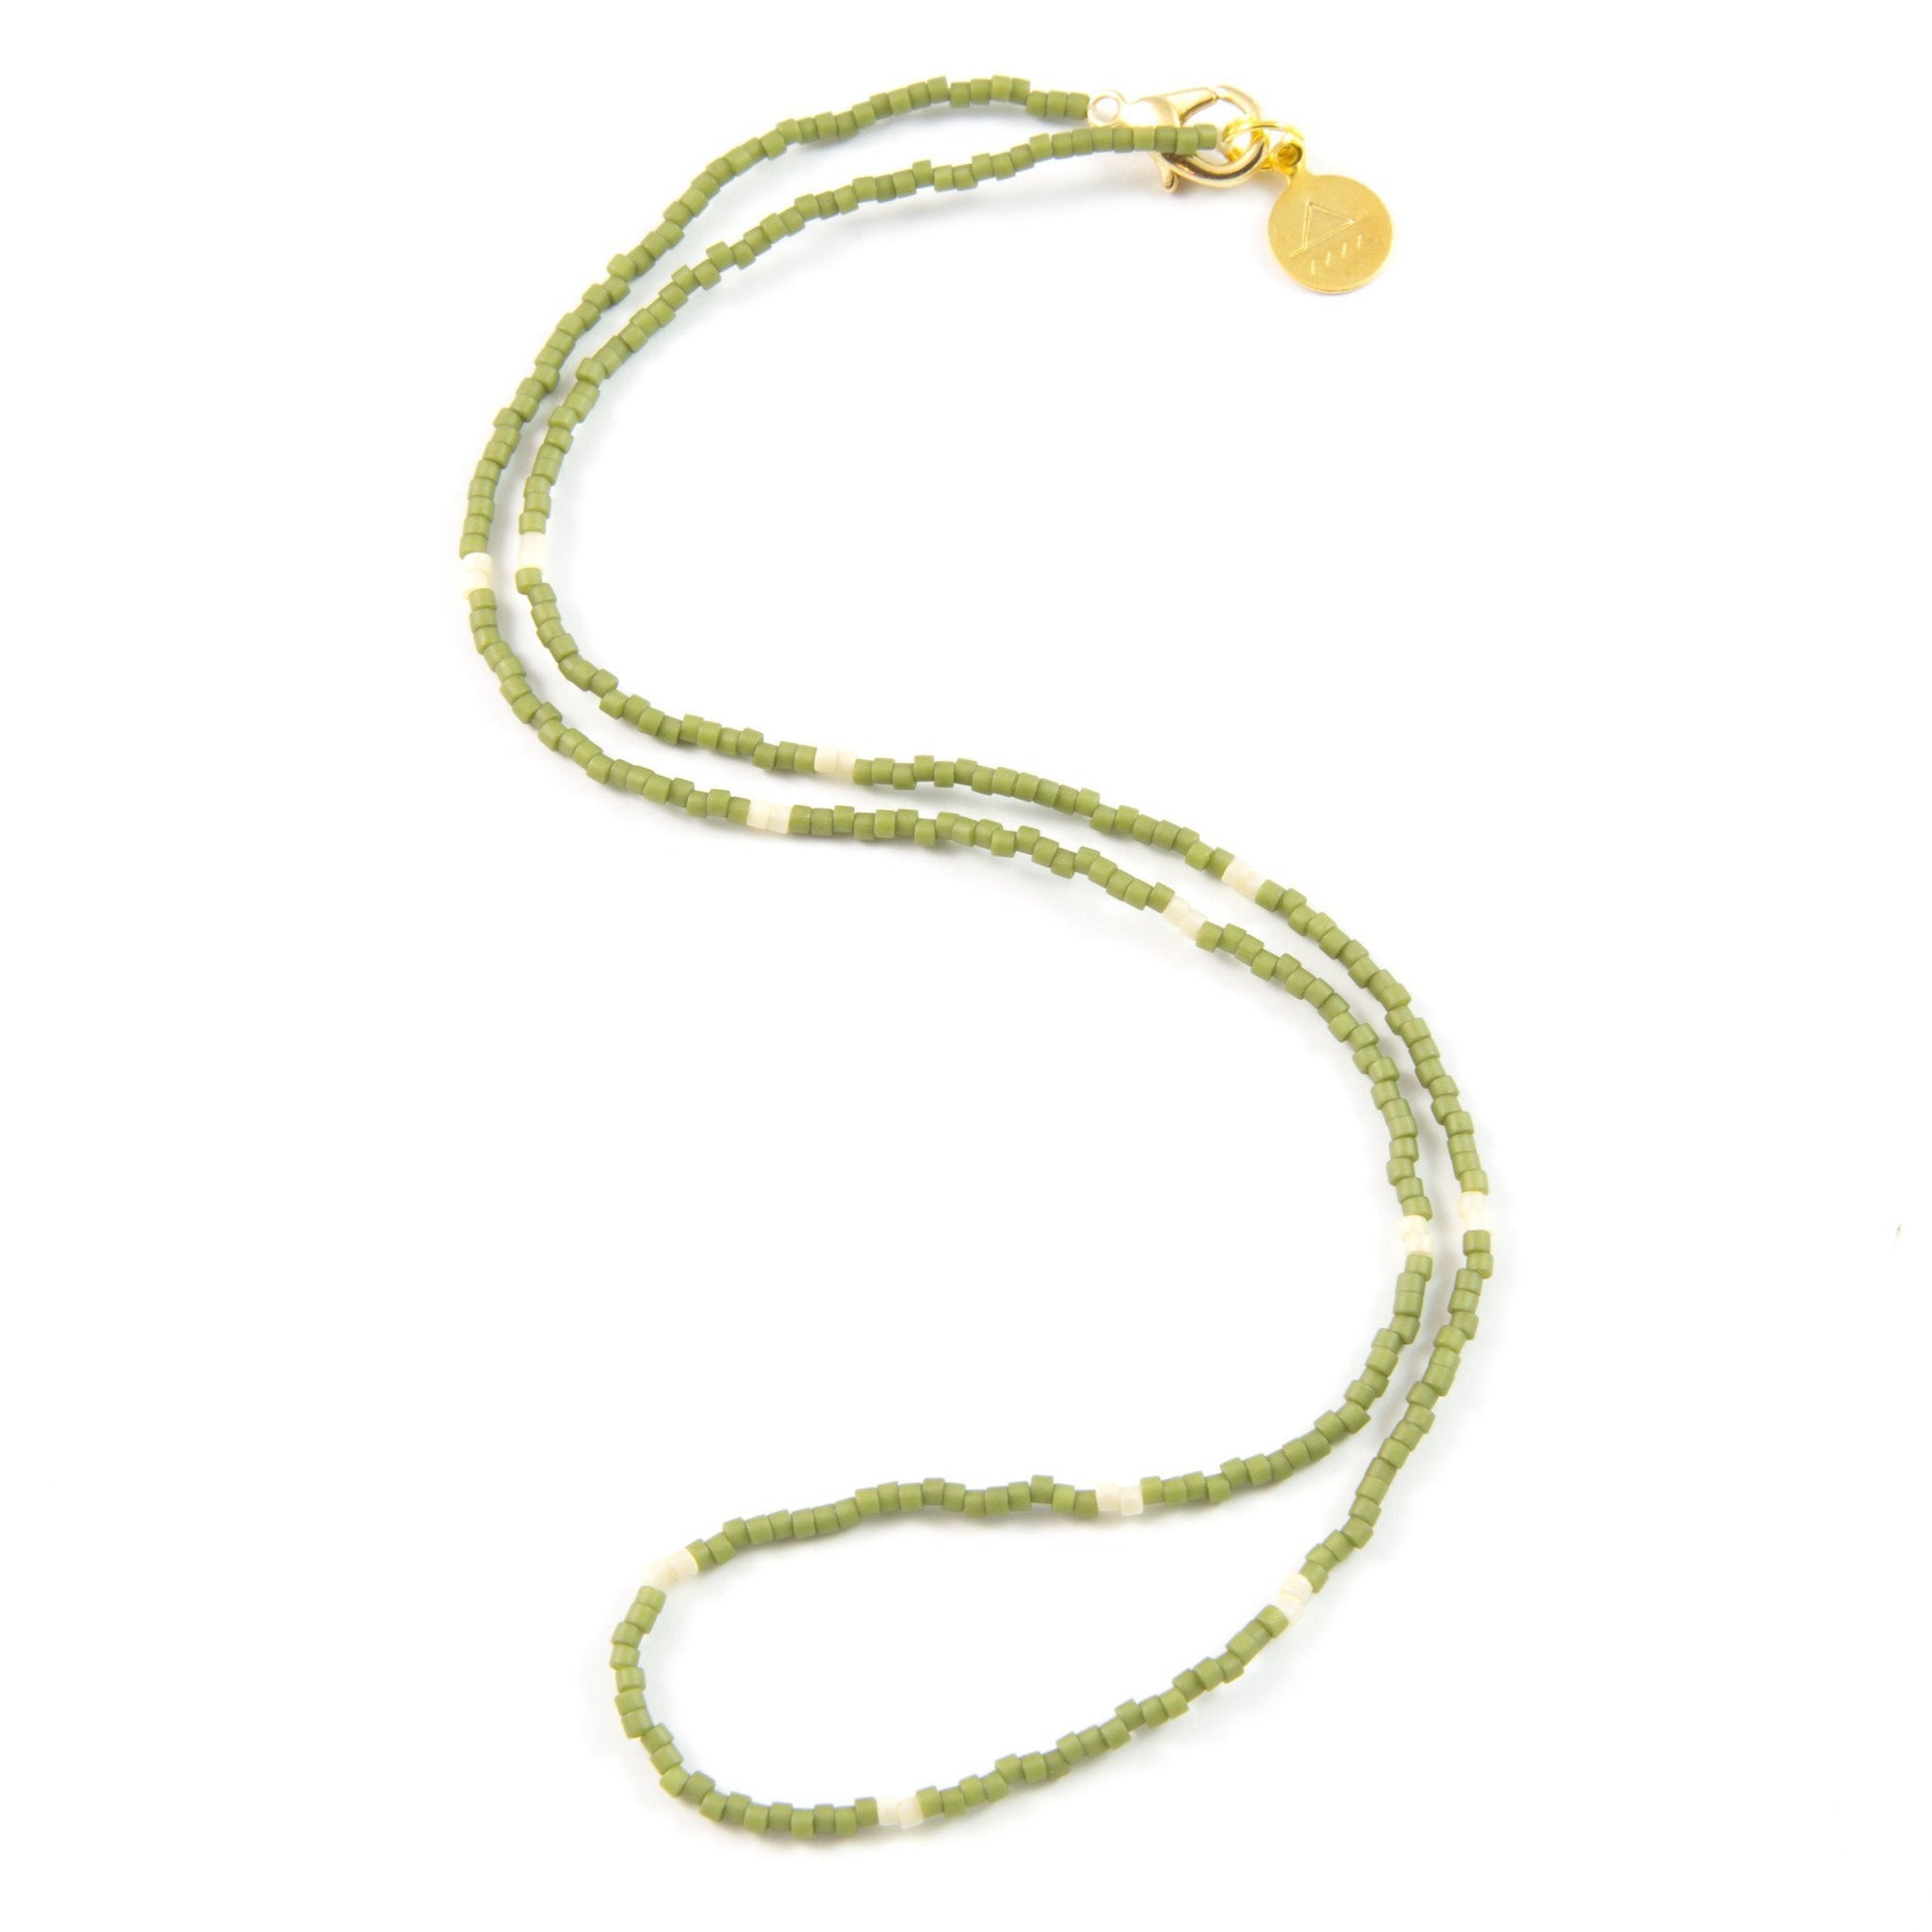 Olive Green W/ Cream Dot Necklace